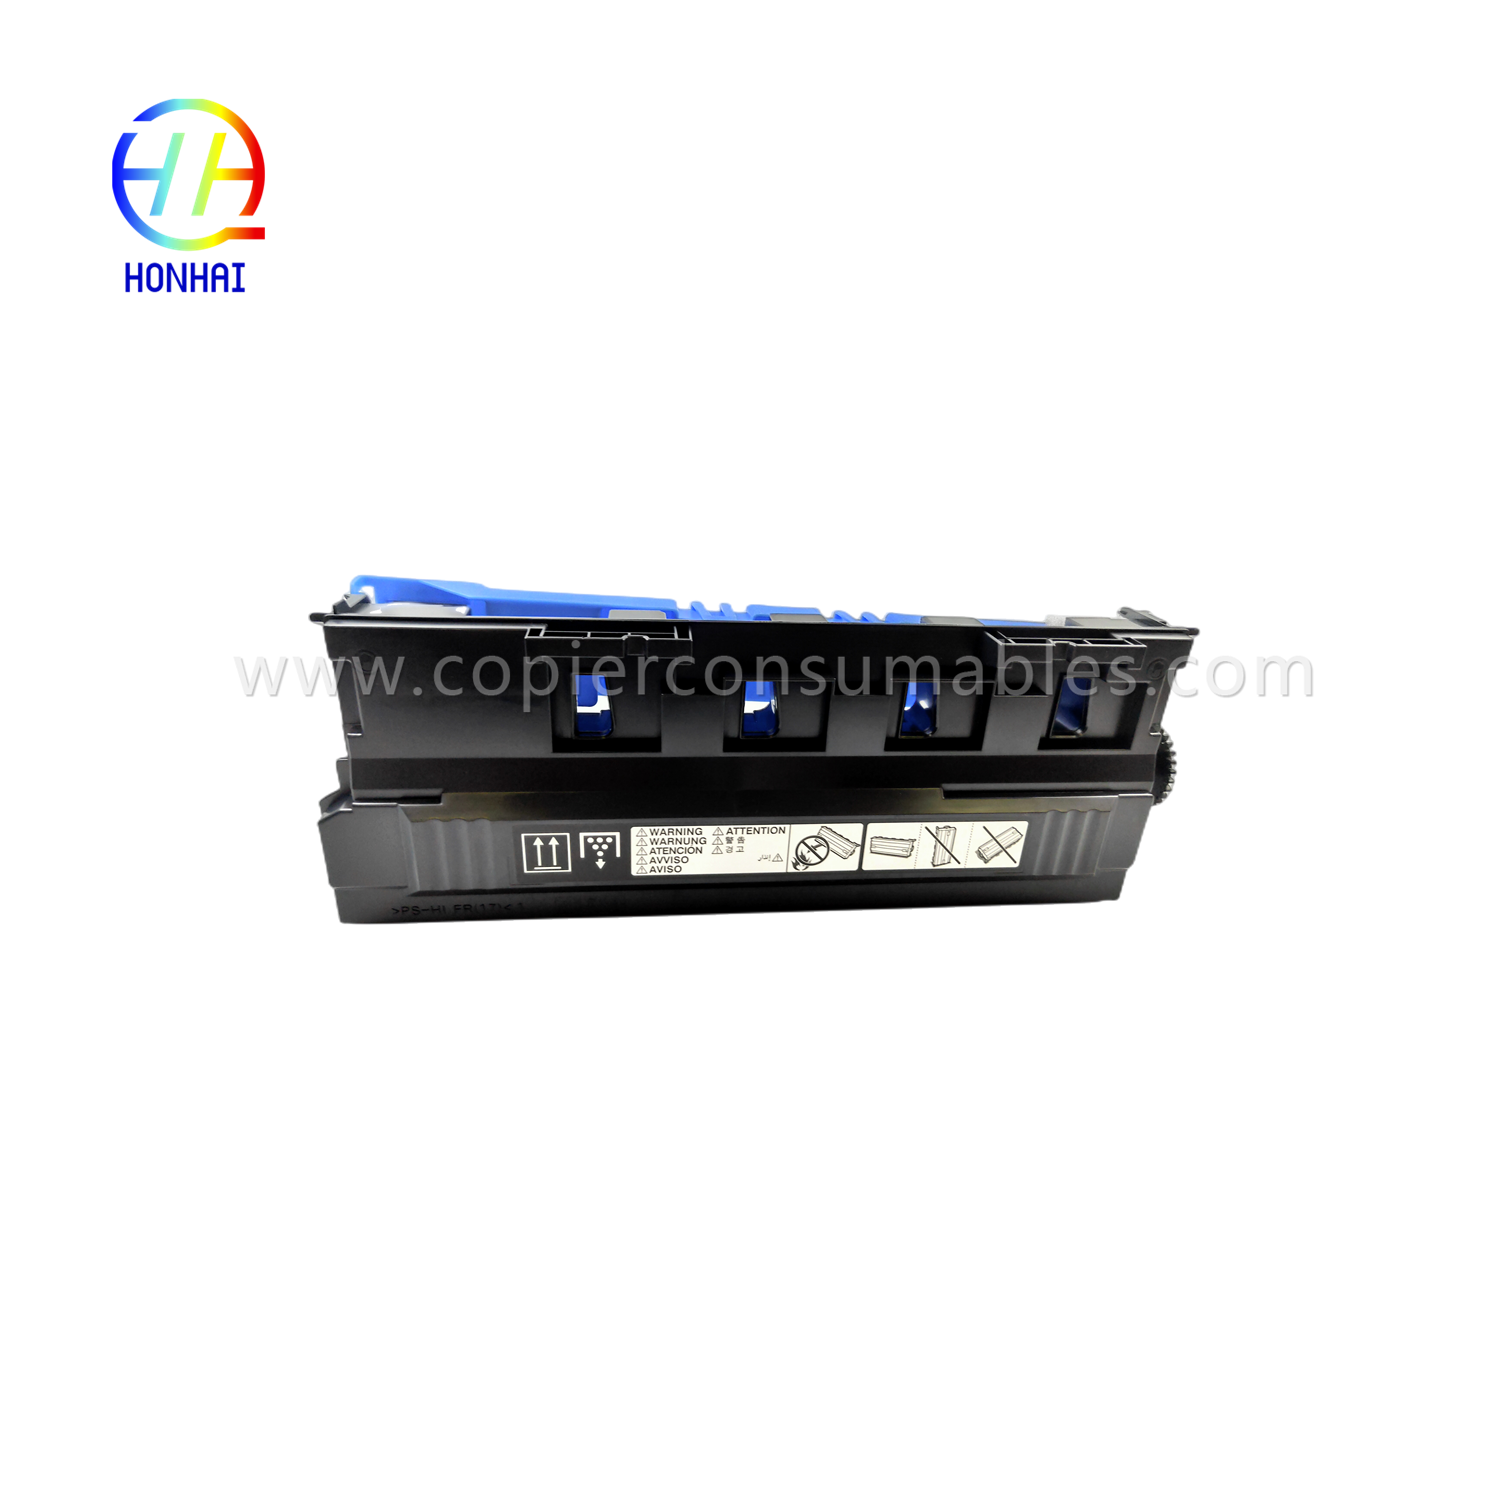 https://c585.goodao.net/waste-toner-container-for-konica-minolta-bizhub-c226-c256-c266-c227-c287-c367-c7333-c7226-c7528-wx-105-a8wajste-1- toner-box-product/